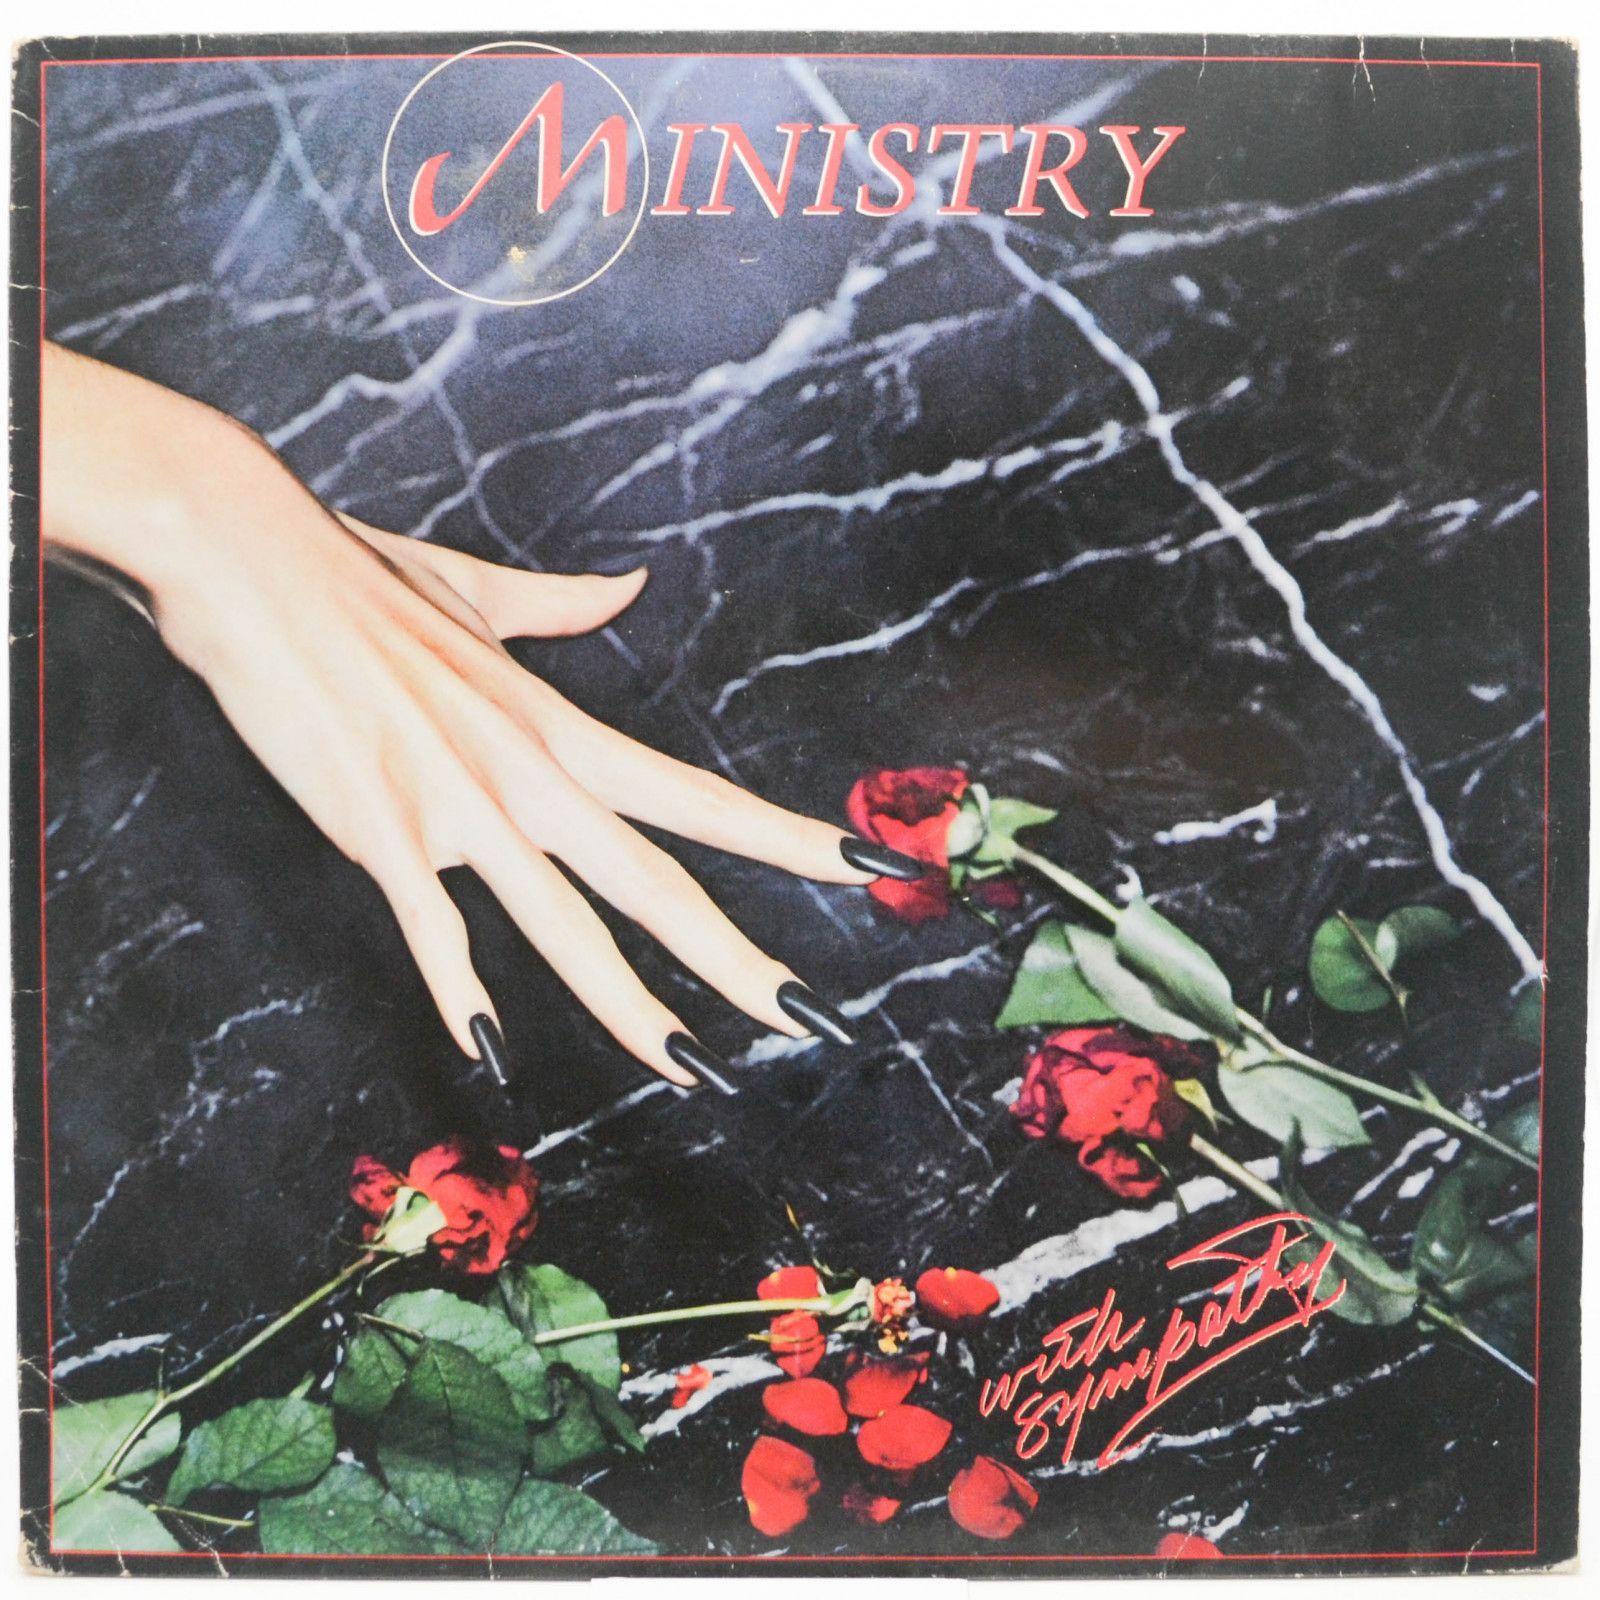 Ministry — With Sympathy, 1983